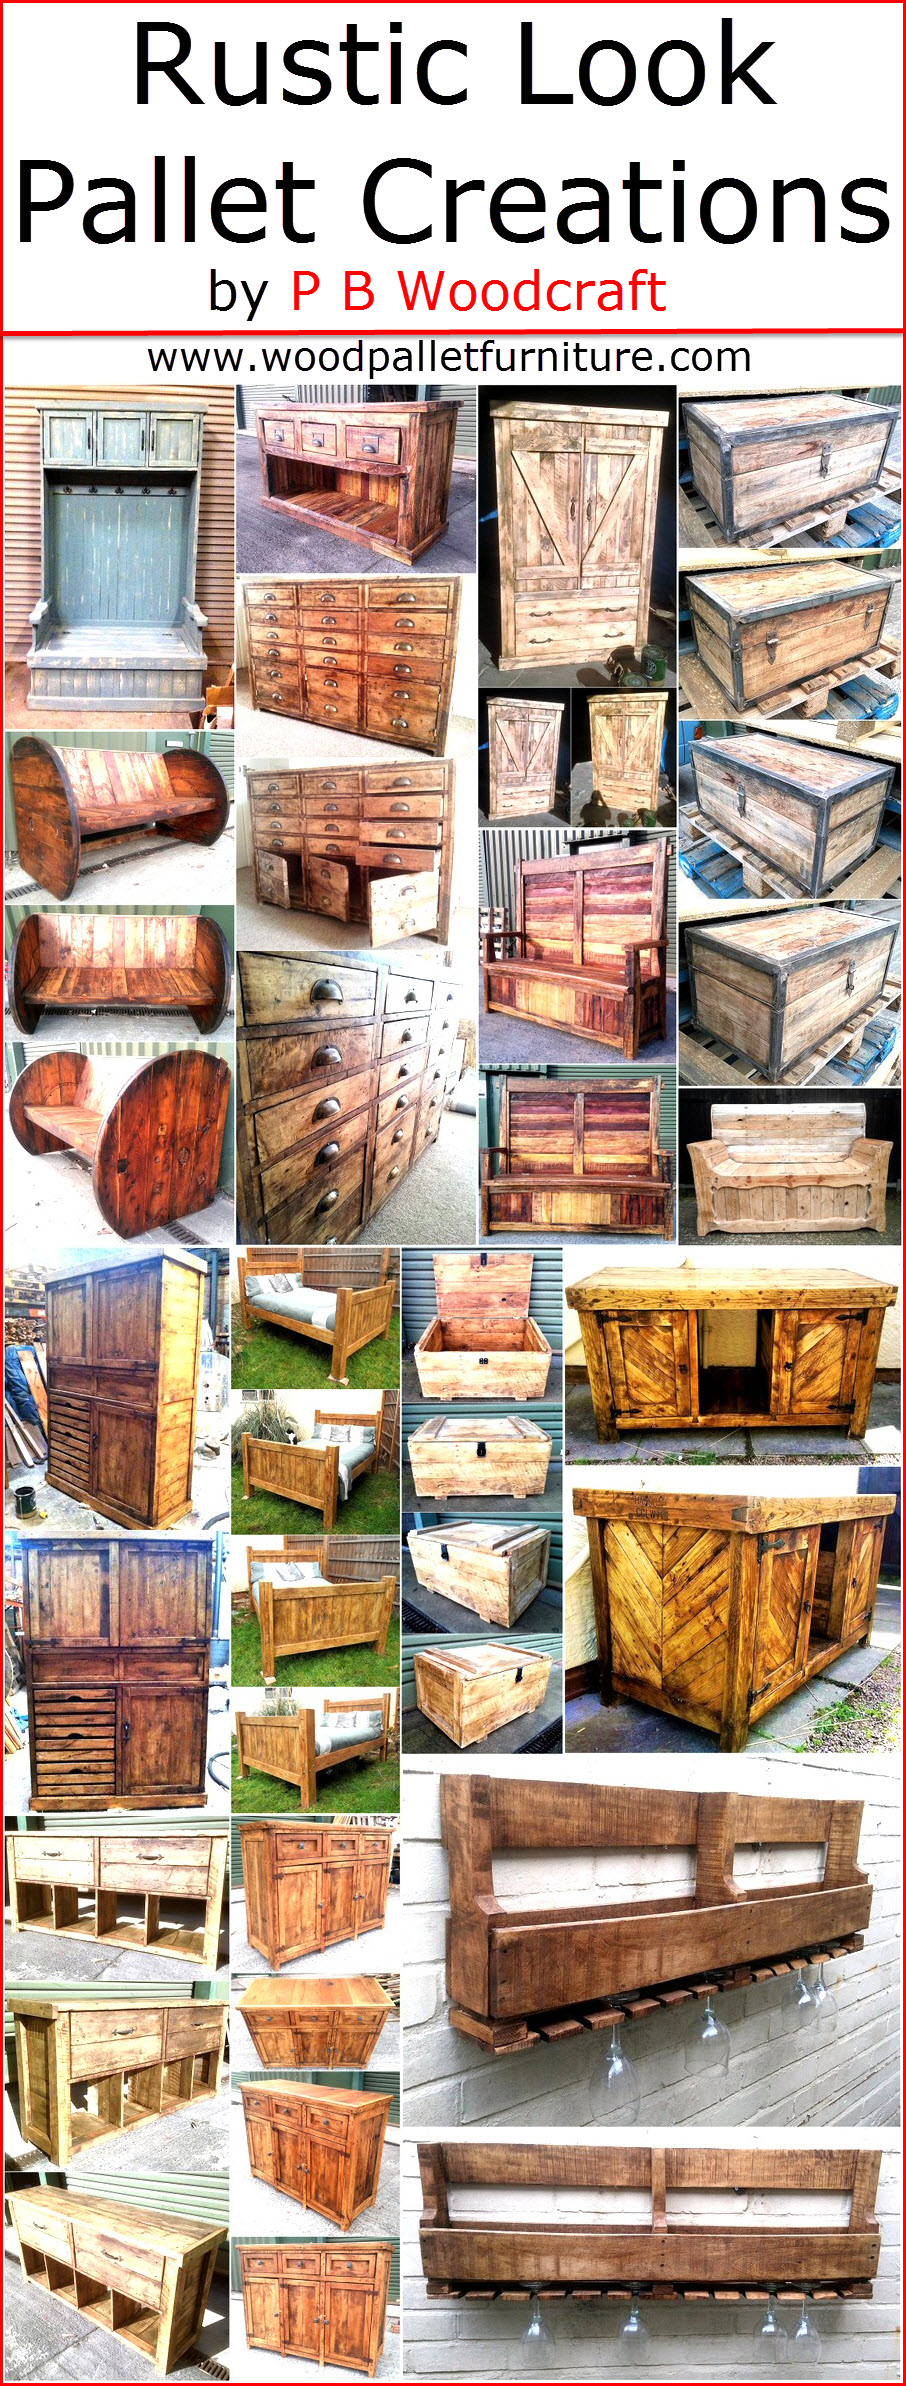 Rustic Look Pallet Creations by P B Woodcraft